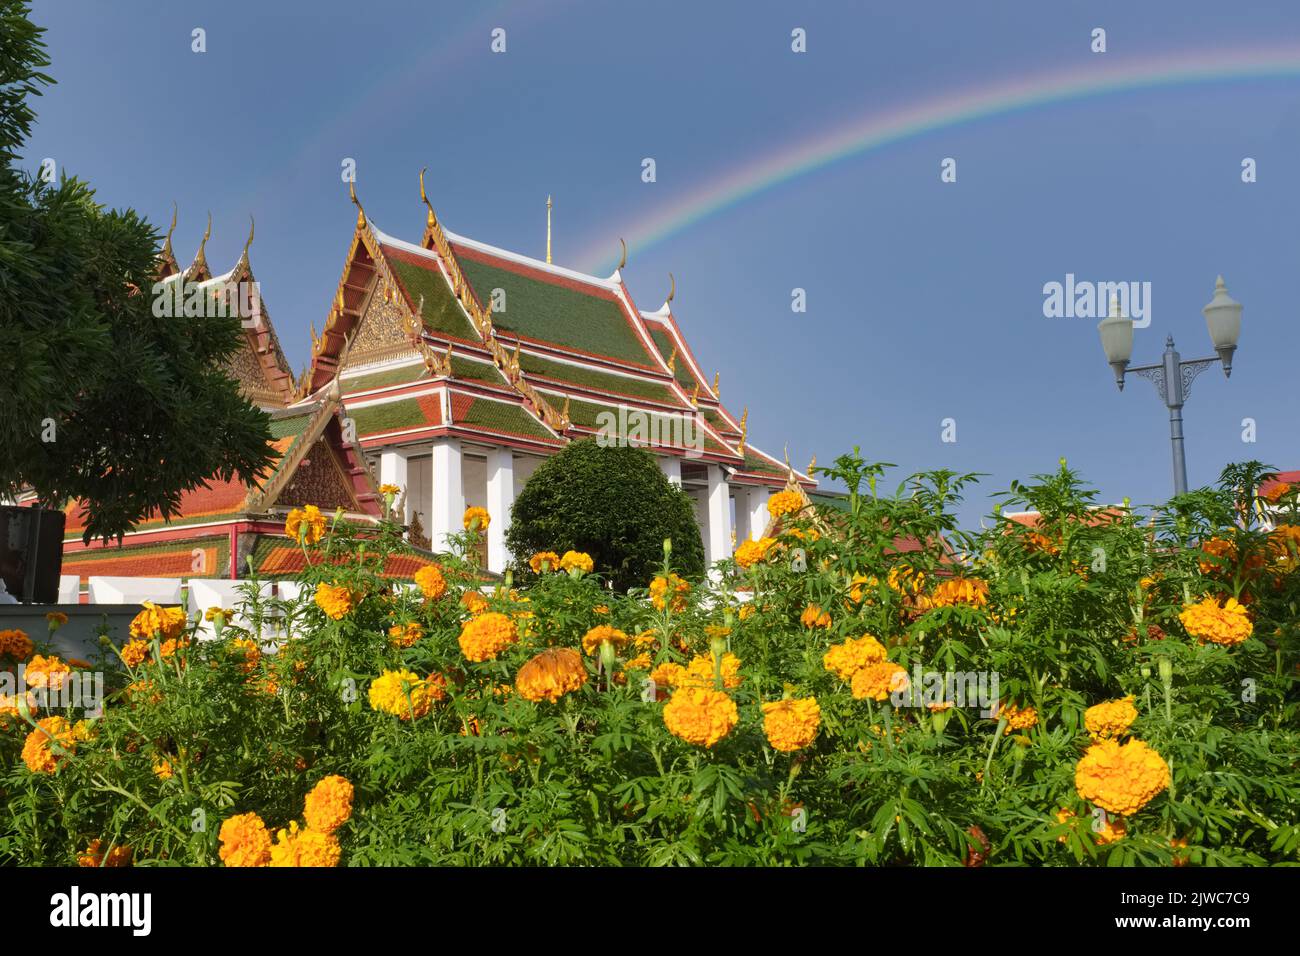 During the rainy season, a rainbow appears over Wat Ratchanadta, a landmark Buddhist temple in Bangkok, Thailand; marigold flowers in the foreground Stock Photo